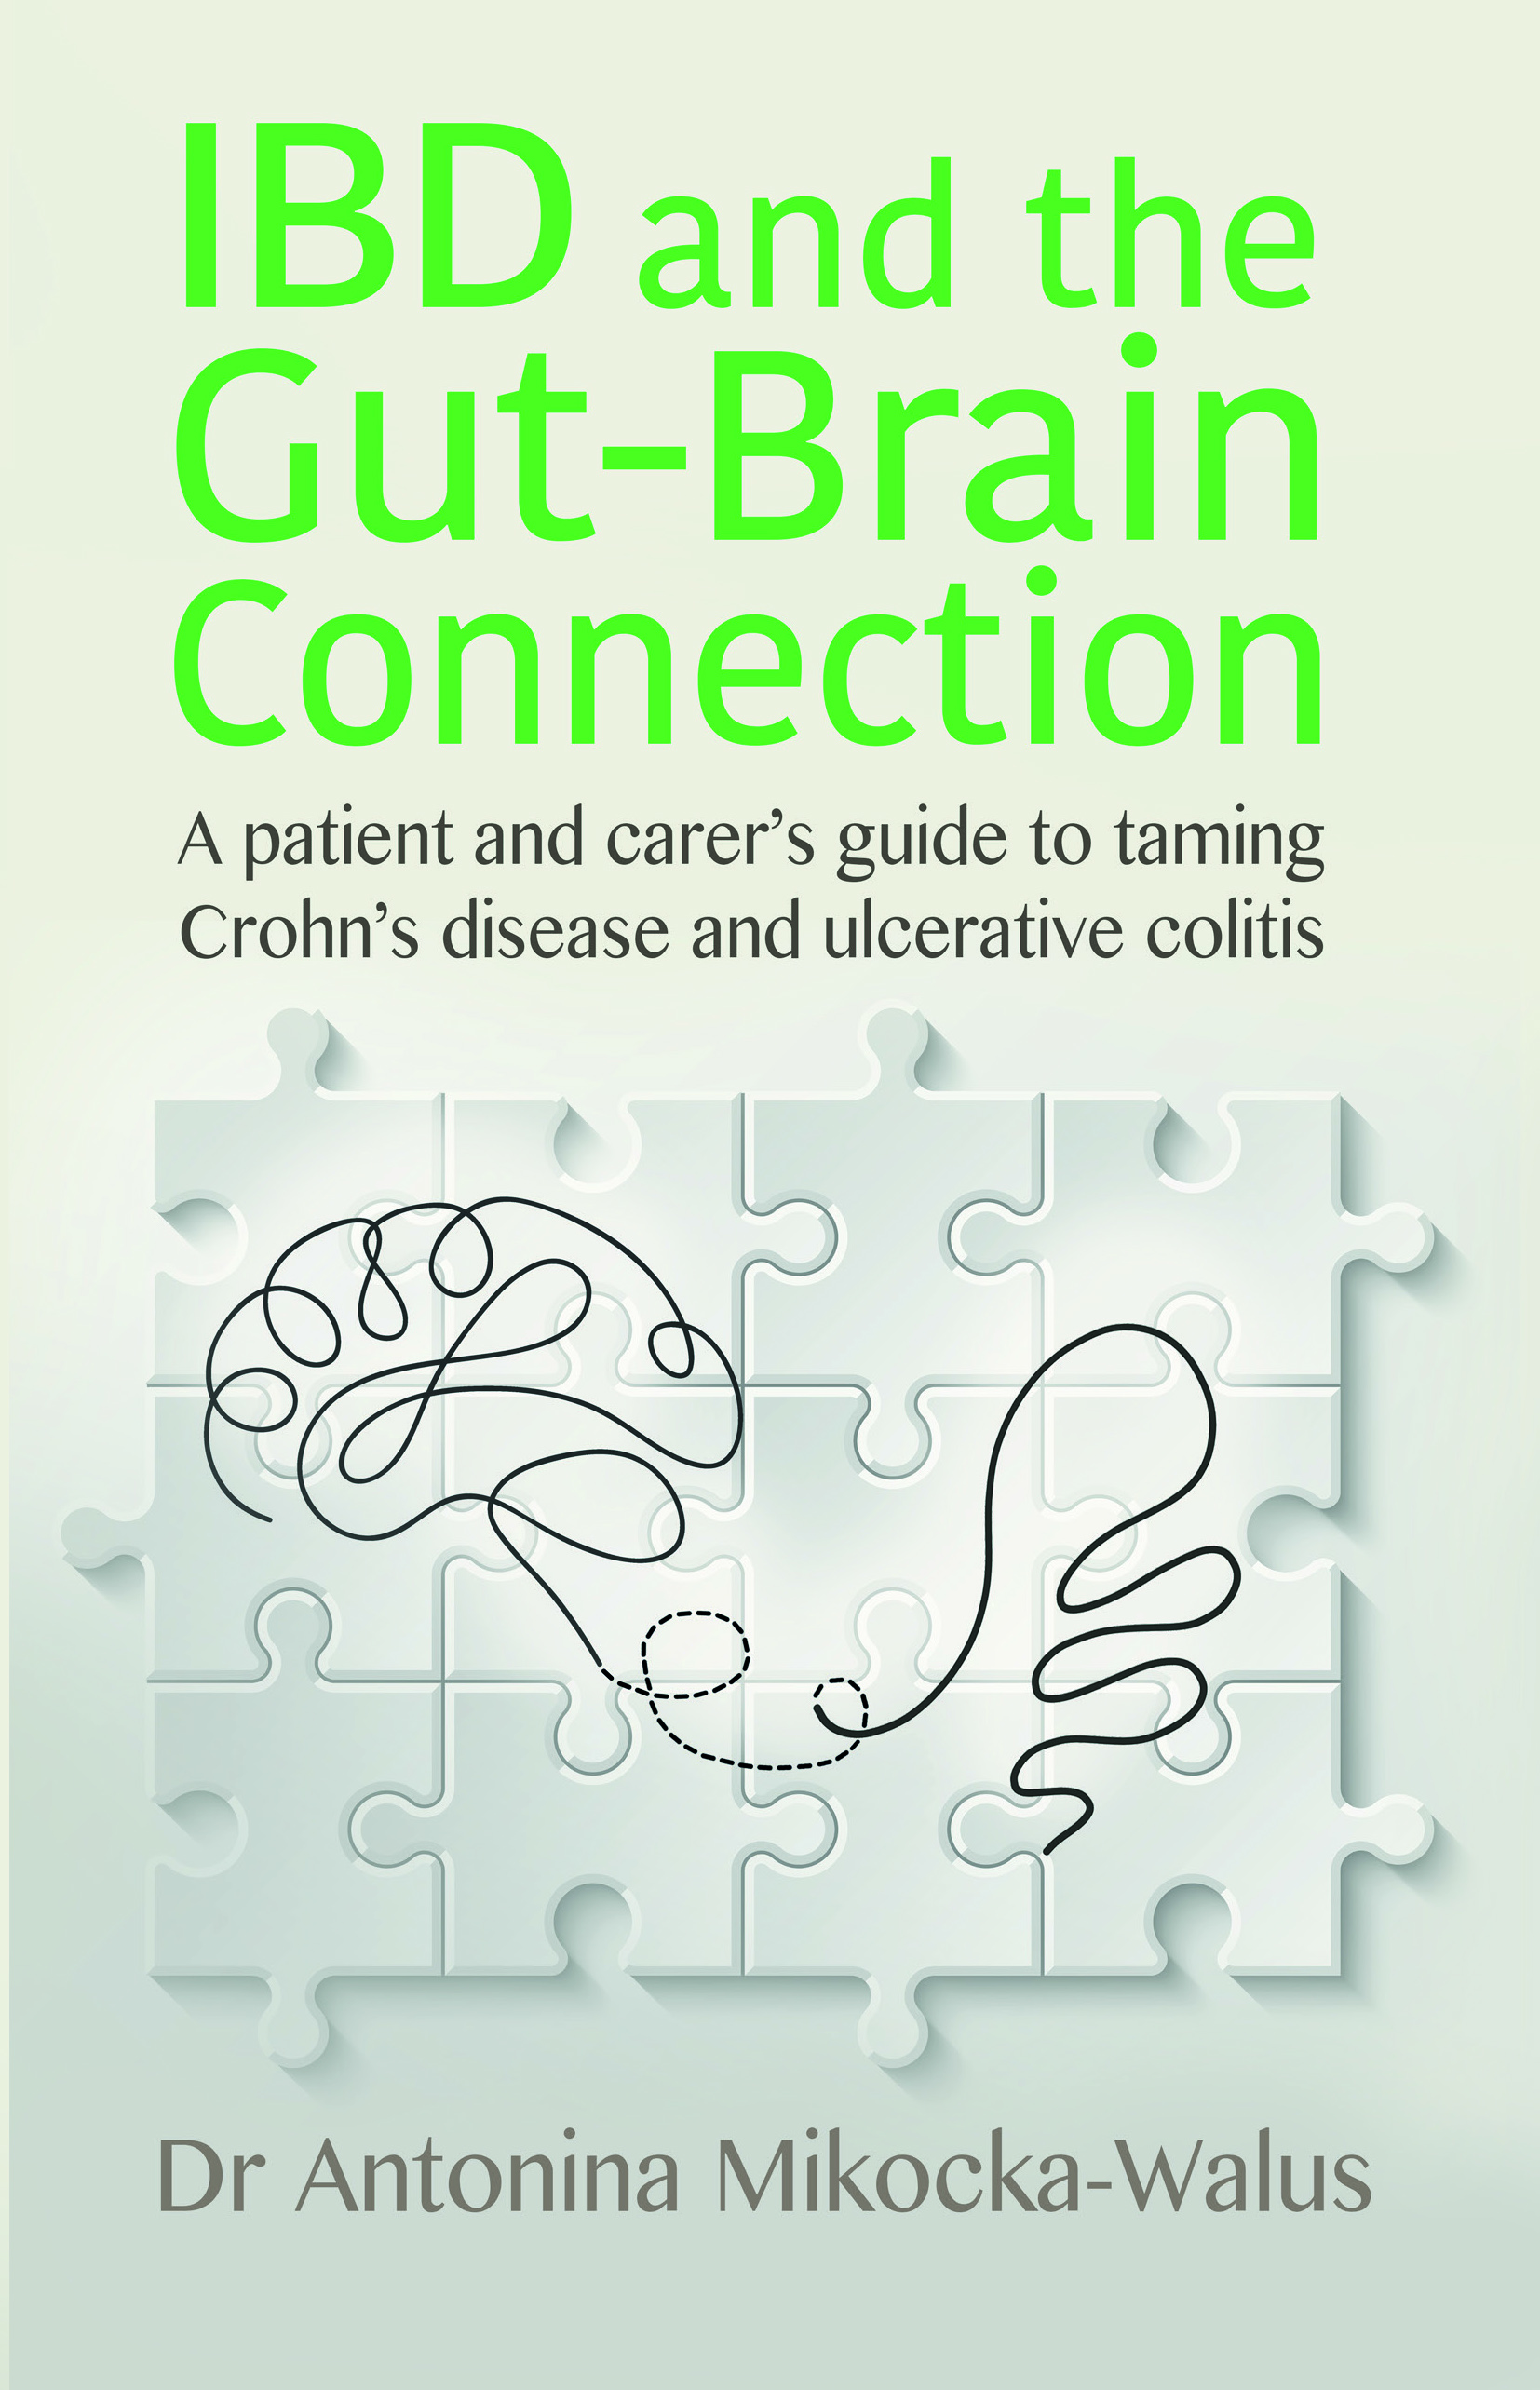 IBD and the Gut-Brain Connection